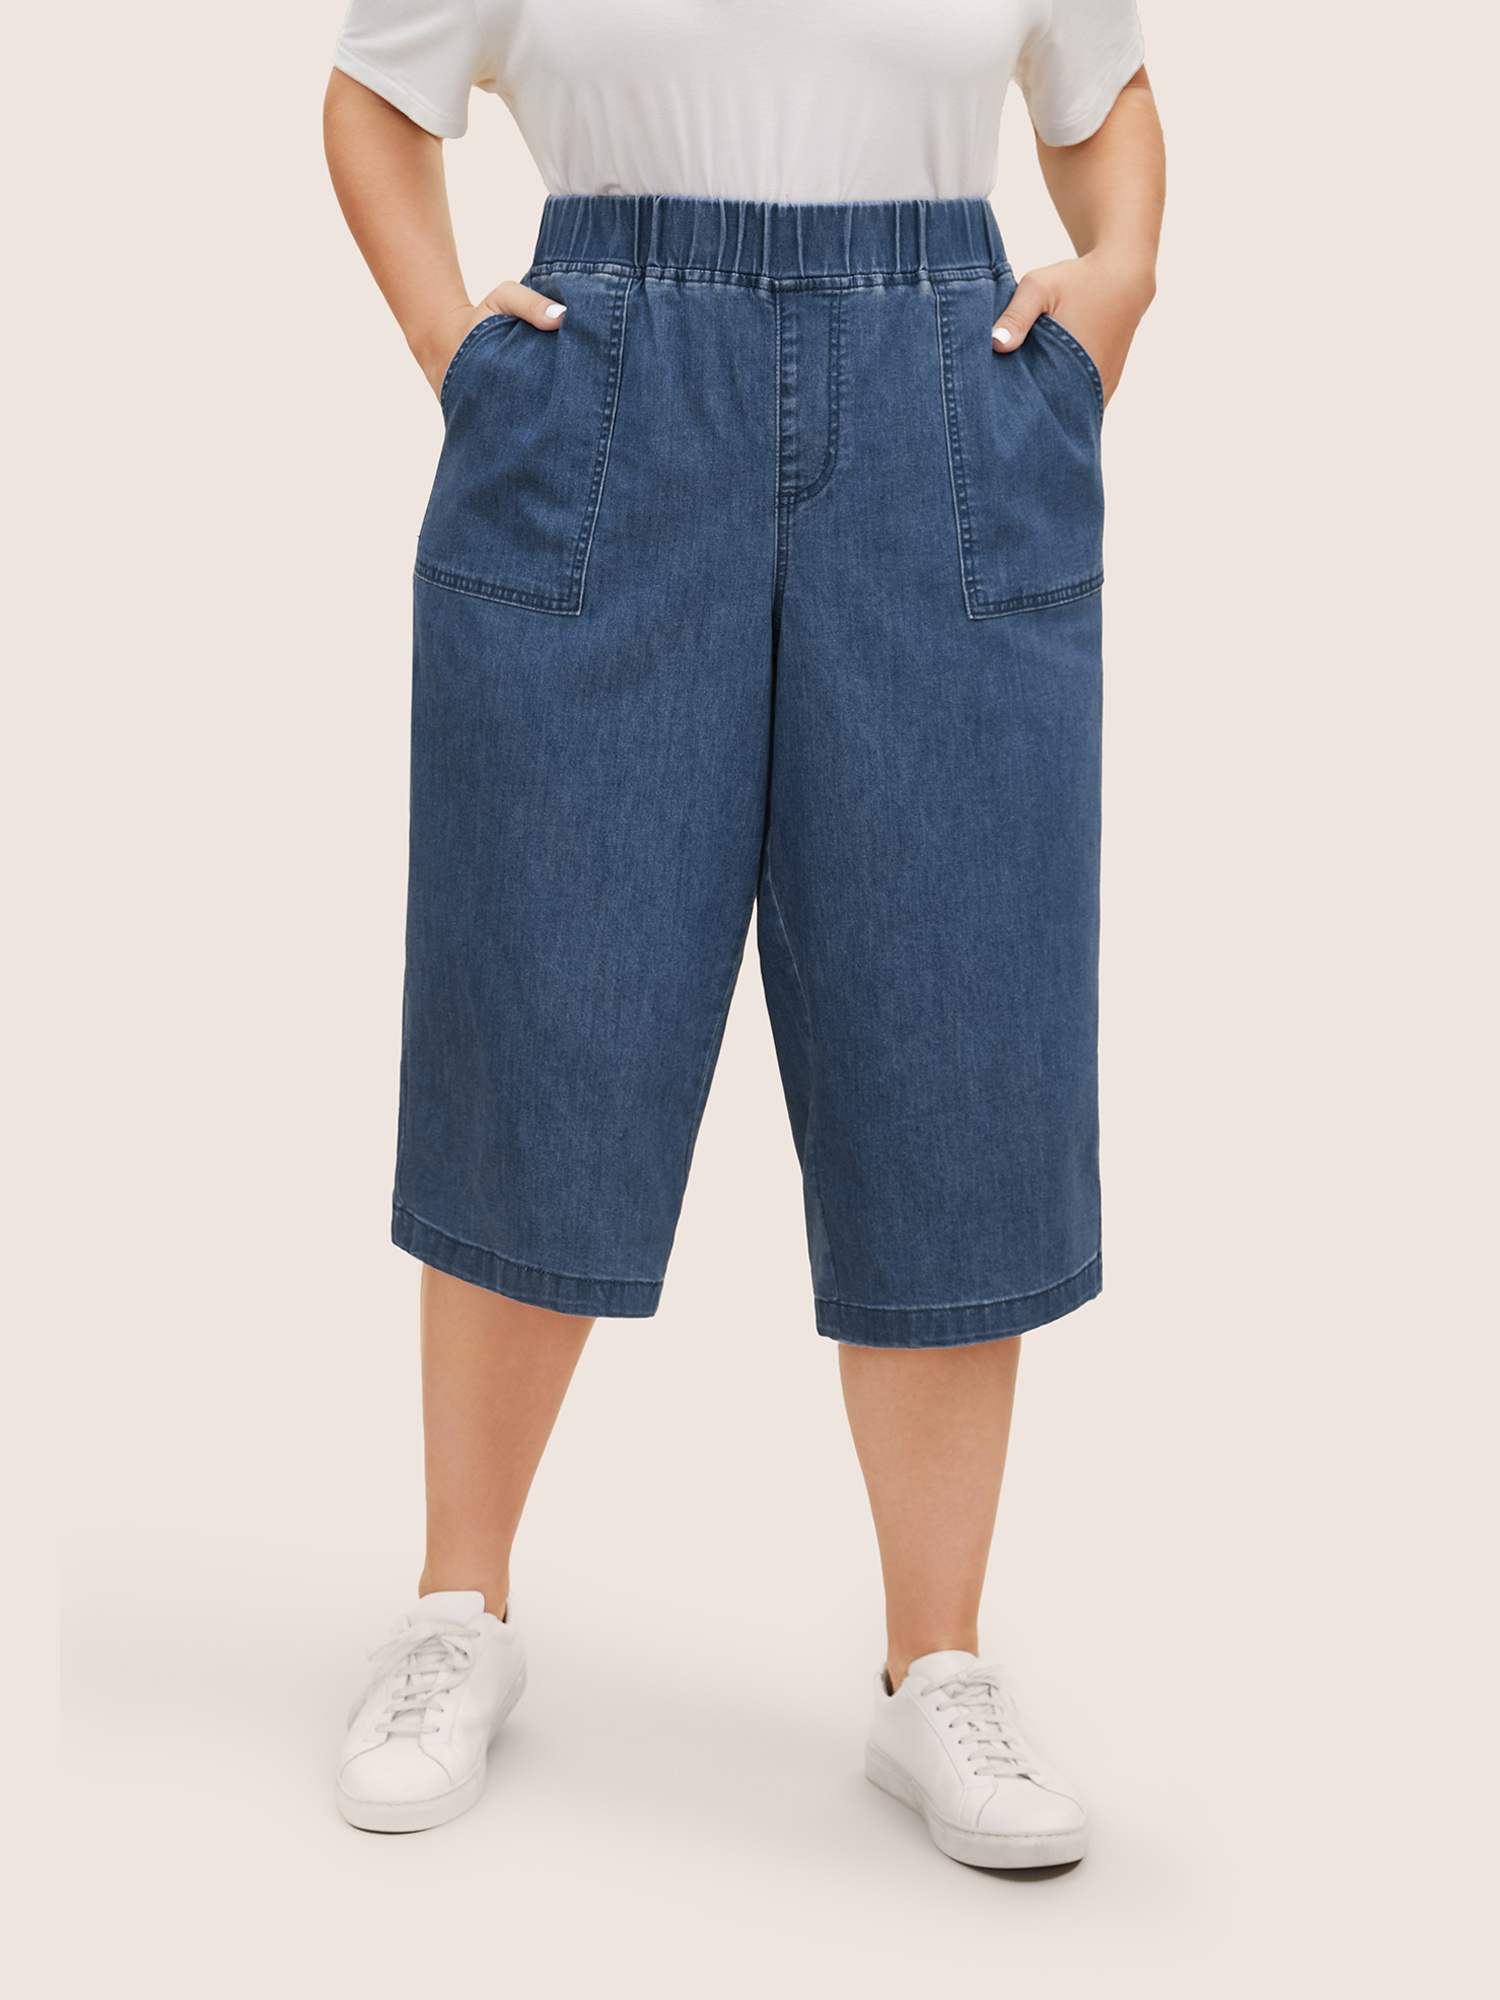 

Plus Size Medium Wash Wide Leg Patch Pocket Cropped Jeans Women Denimblue Casual High stretch Patch pocket Jeans BloomChic